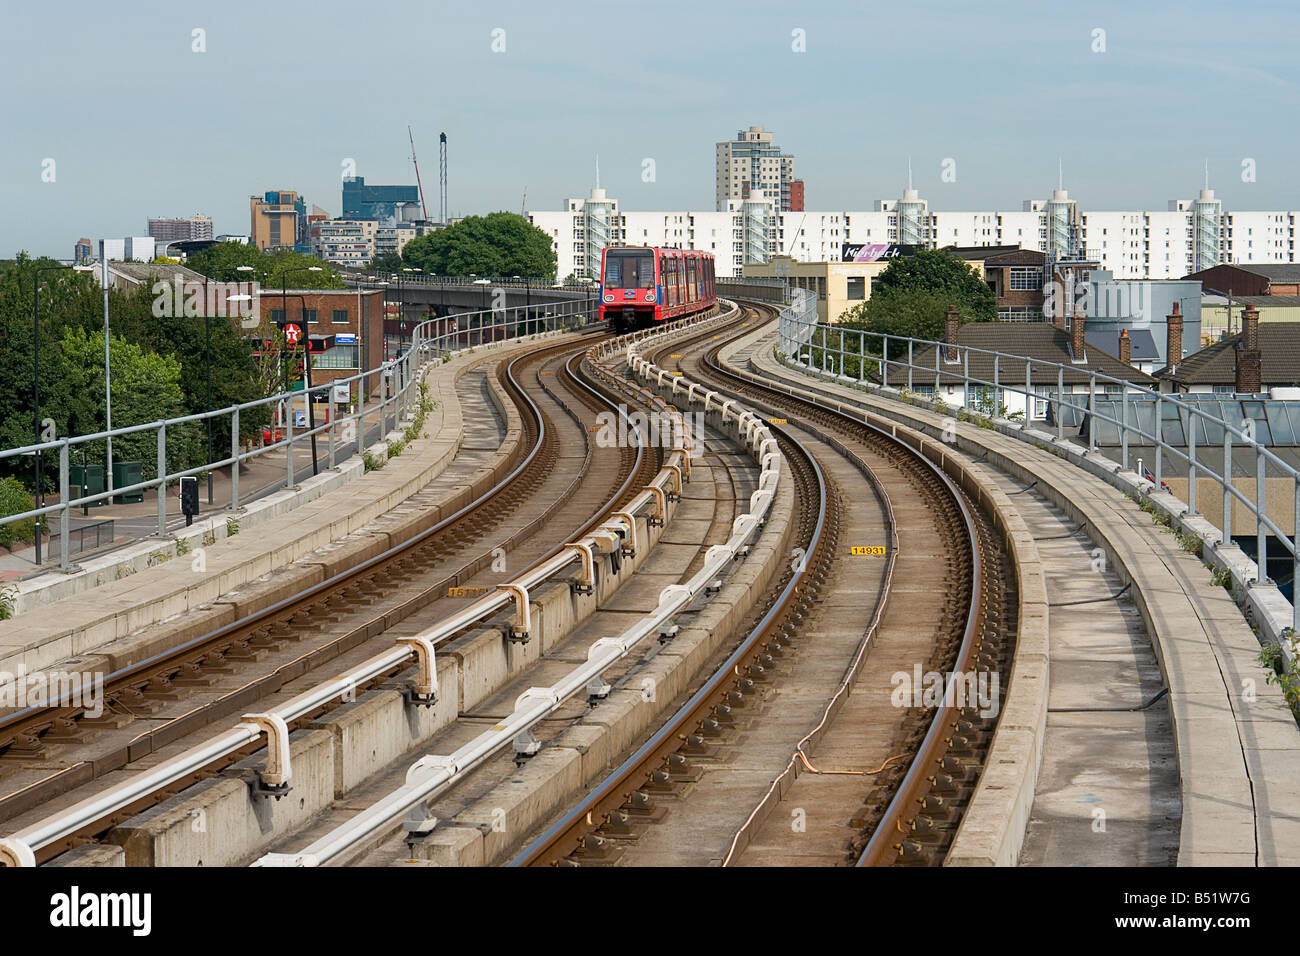 Canning Town east London on the DLR - Docklands Light Railway Stock Photo